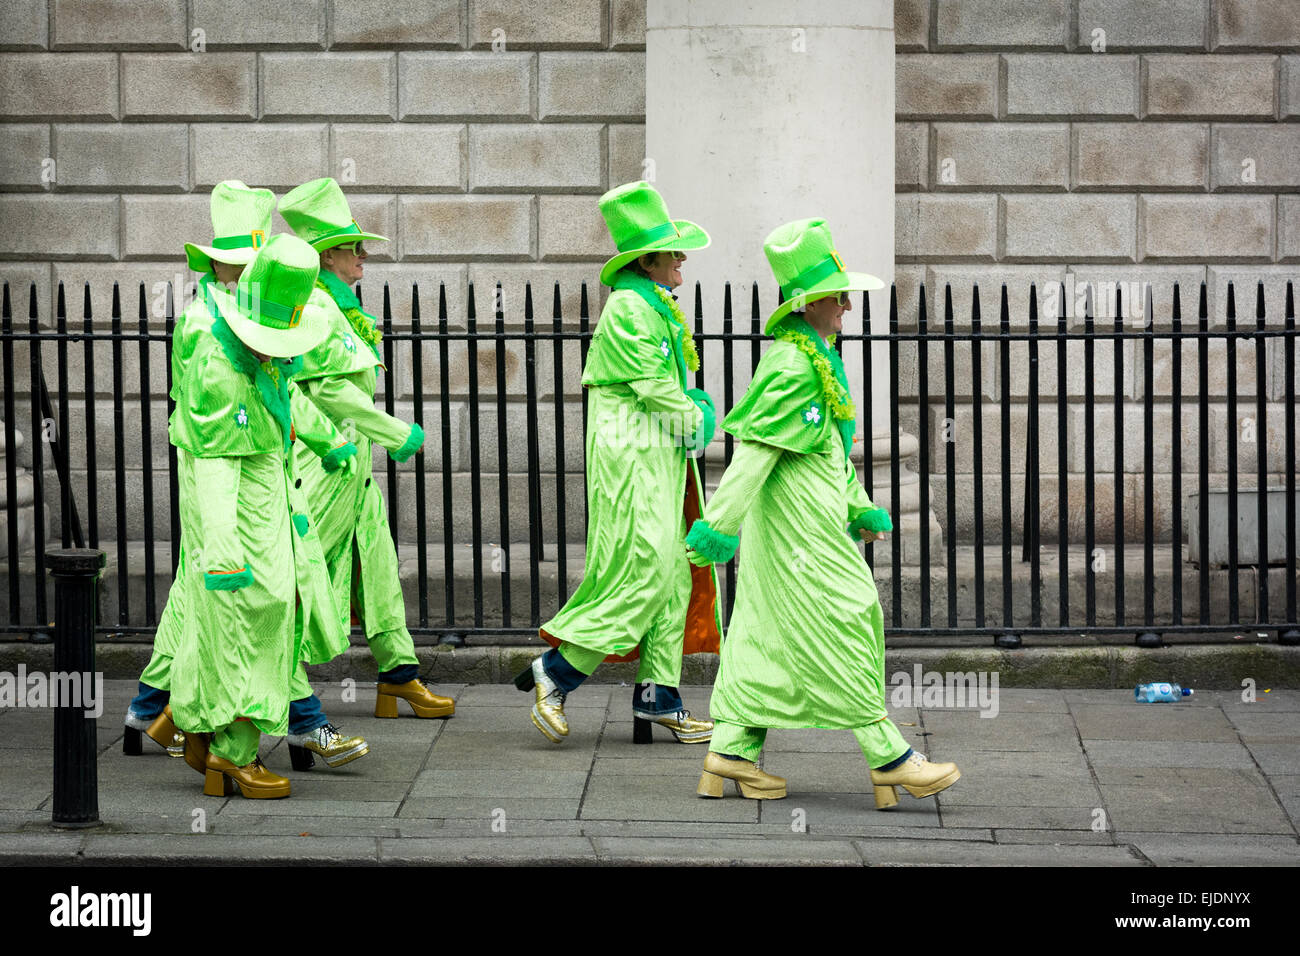 St Patrick's Day Dublin 2015 - 5 men in glam Irish outfits and platforms walk along street Stock Photo